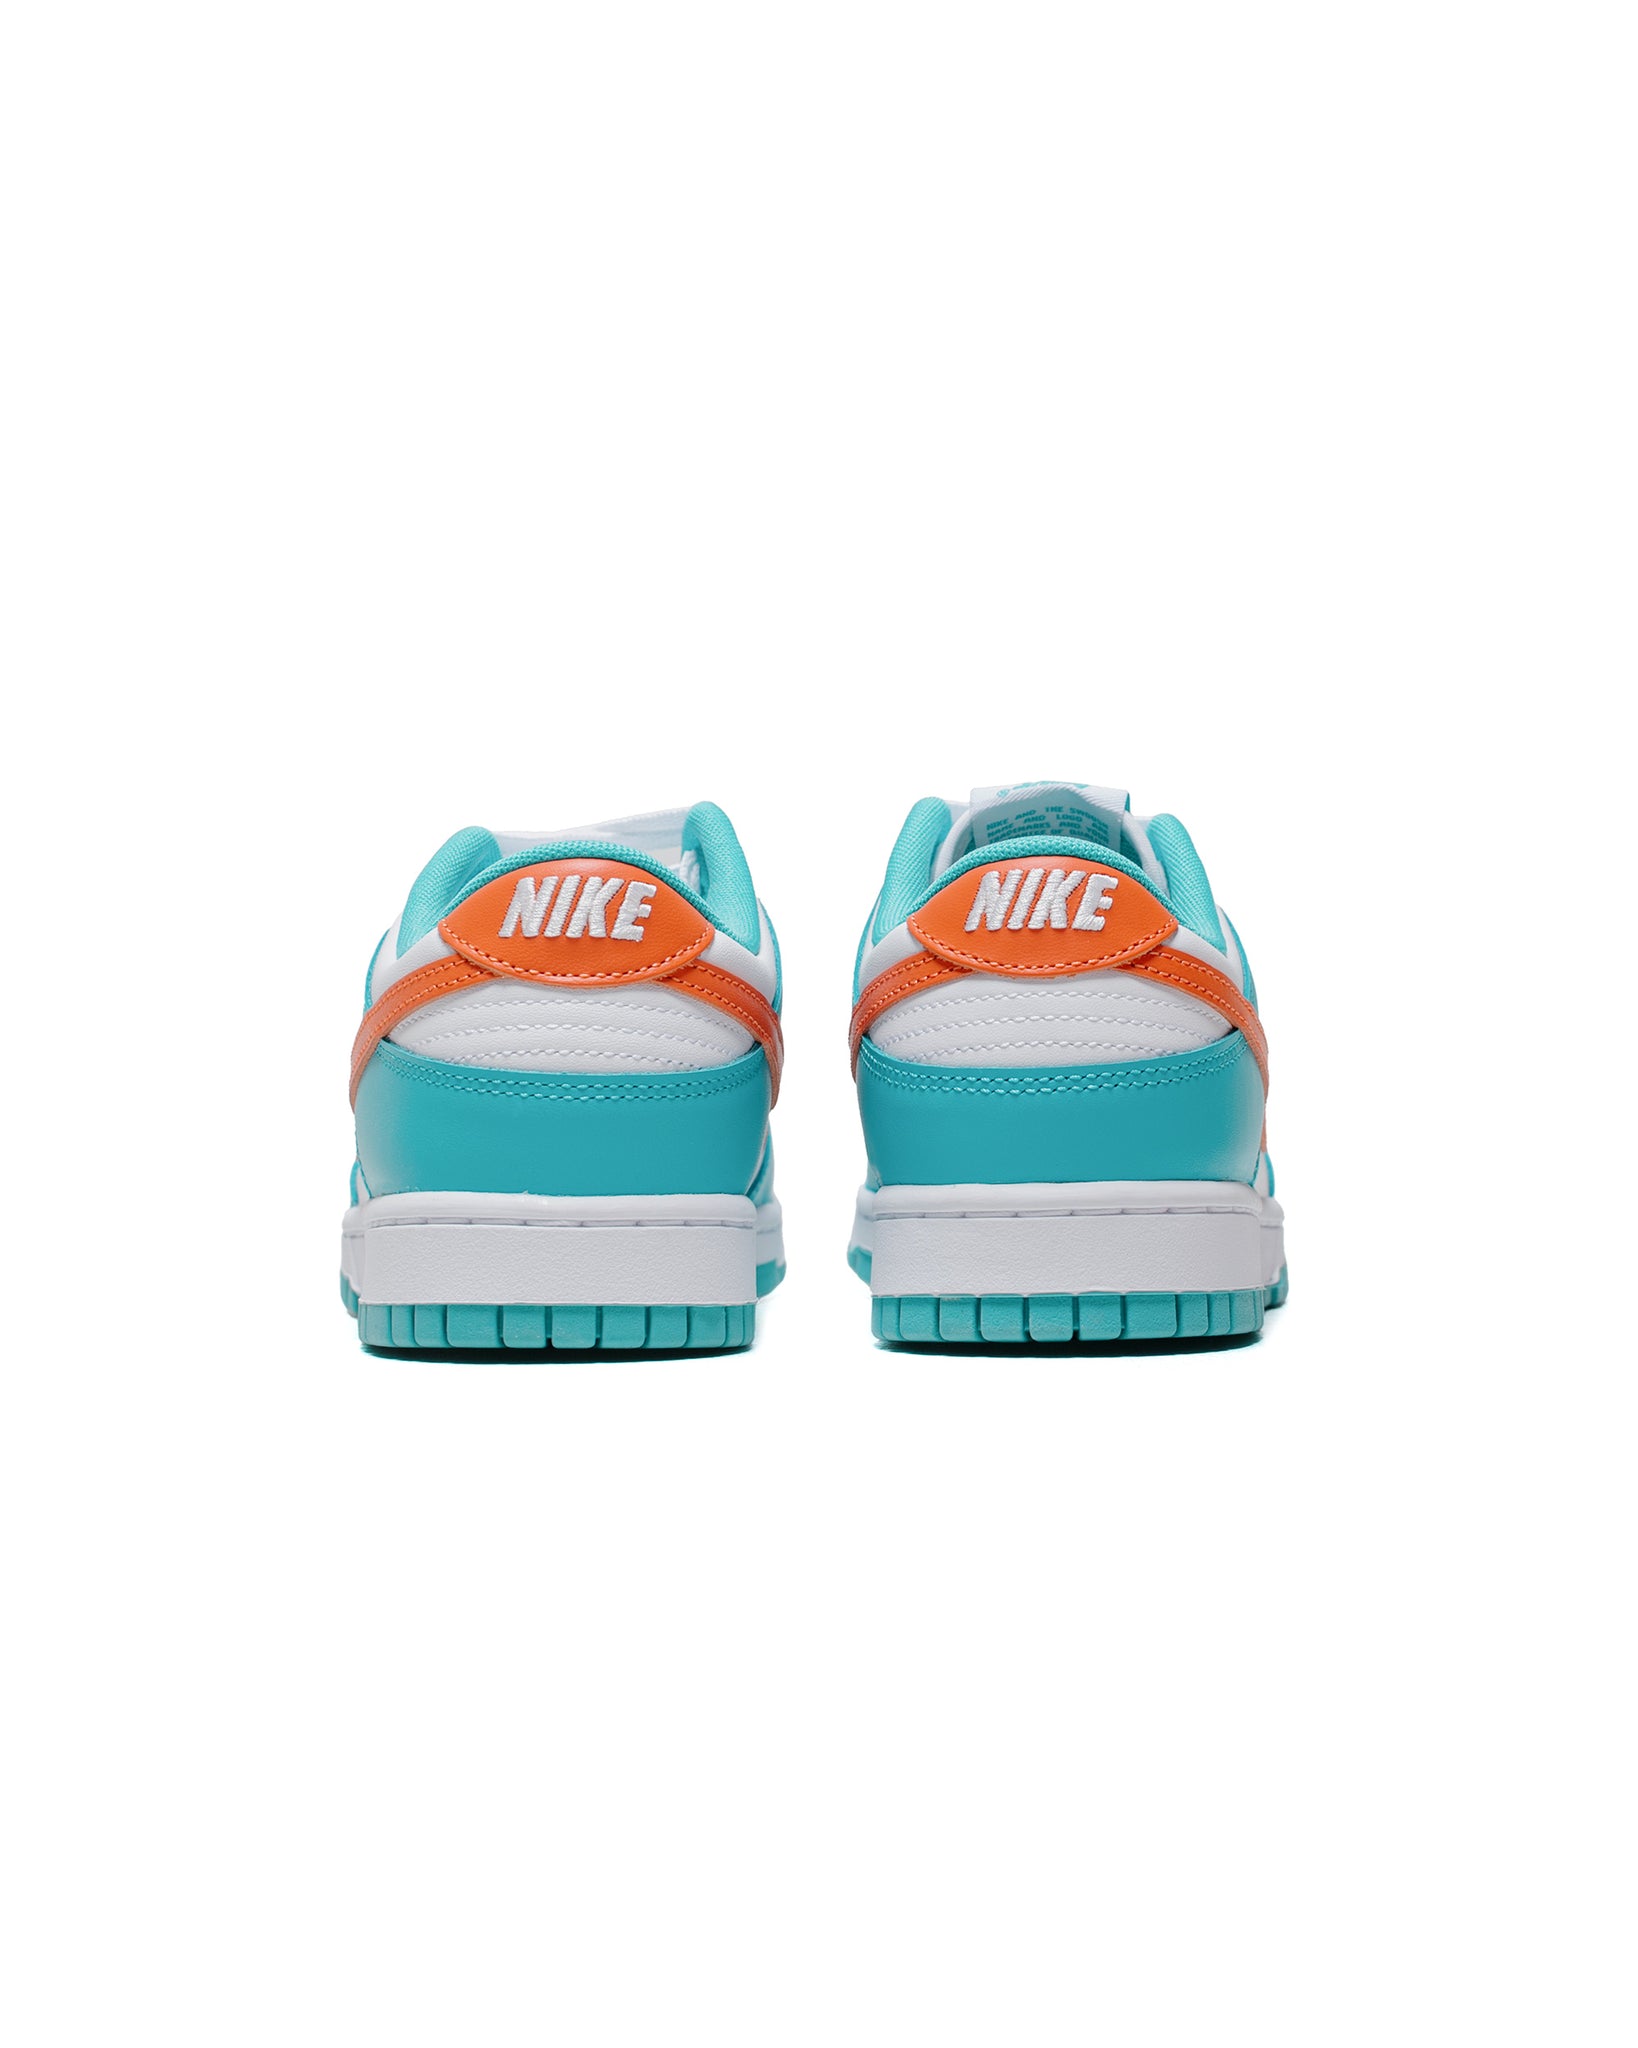 Nike Dunk Low Retro BTTYS "Miami Dolphins" back